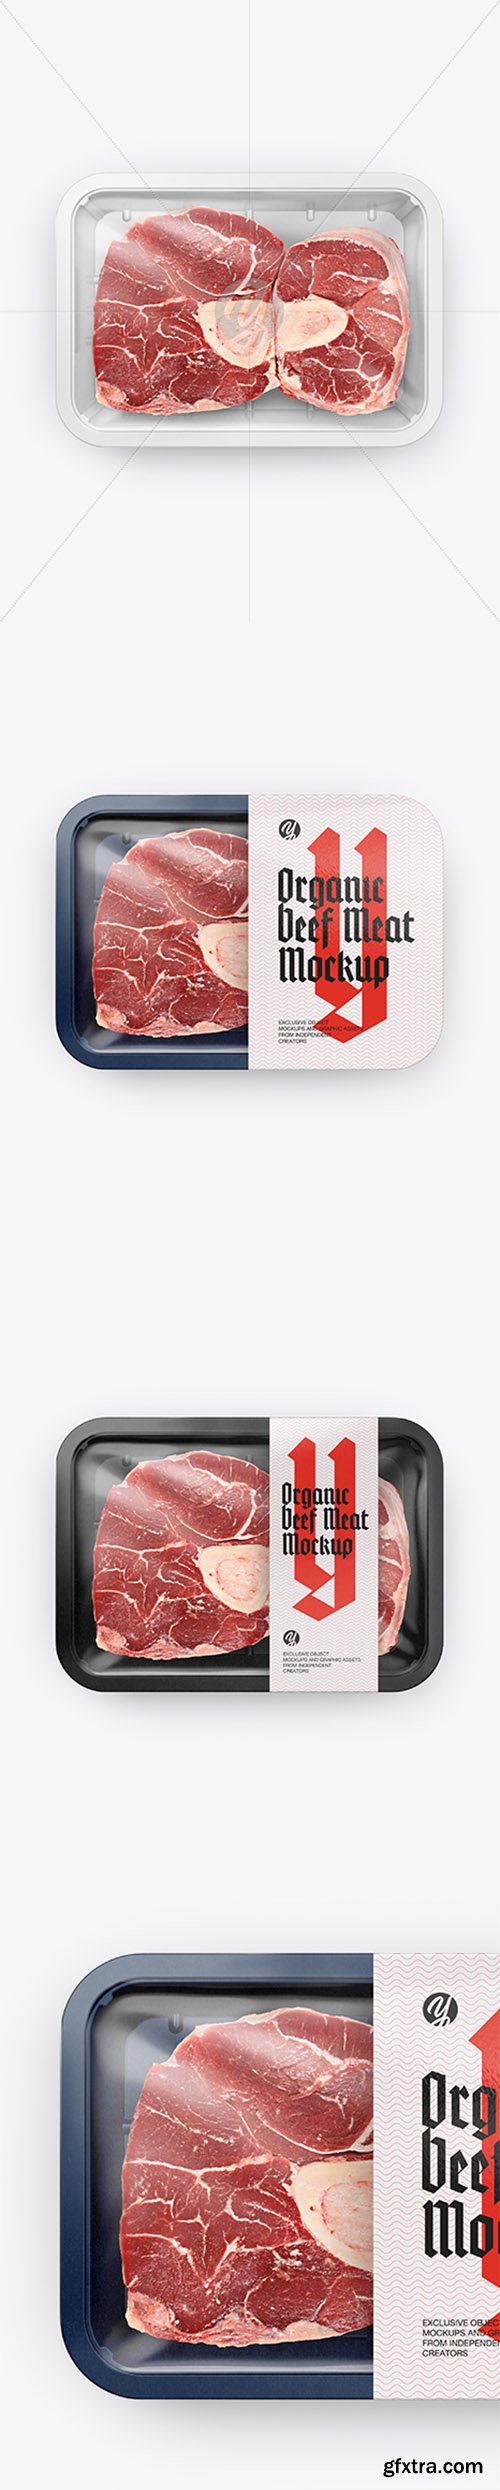 Plastic Tray With Beef Meat Mockup - Top View 29656